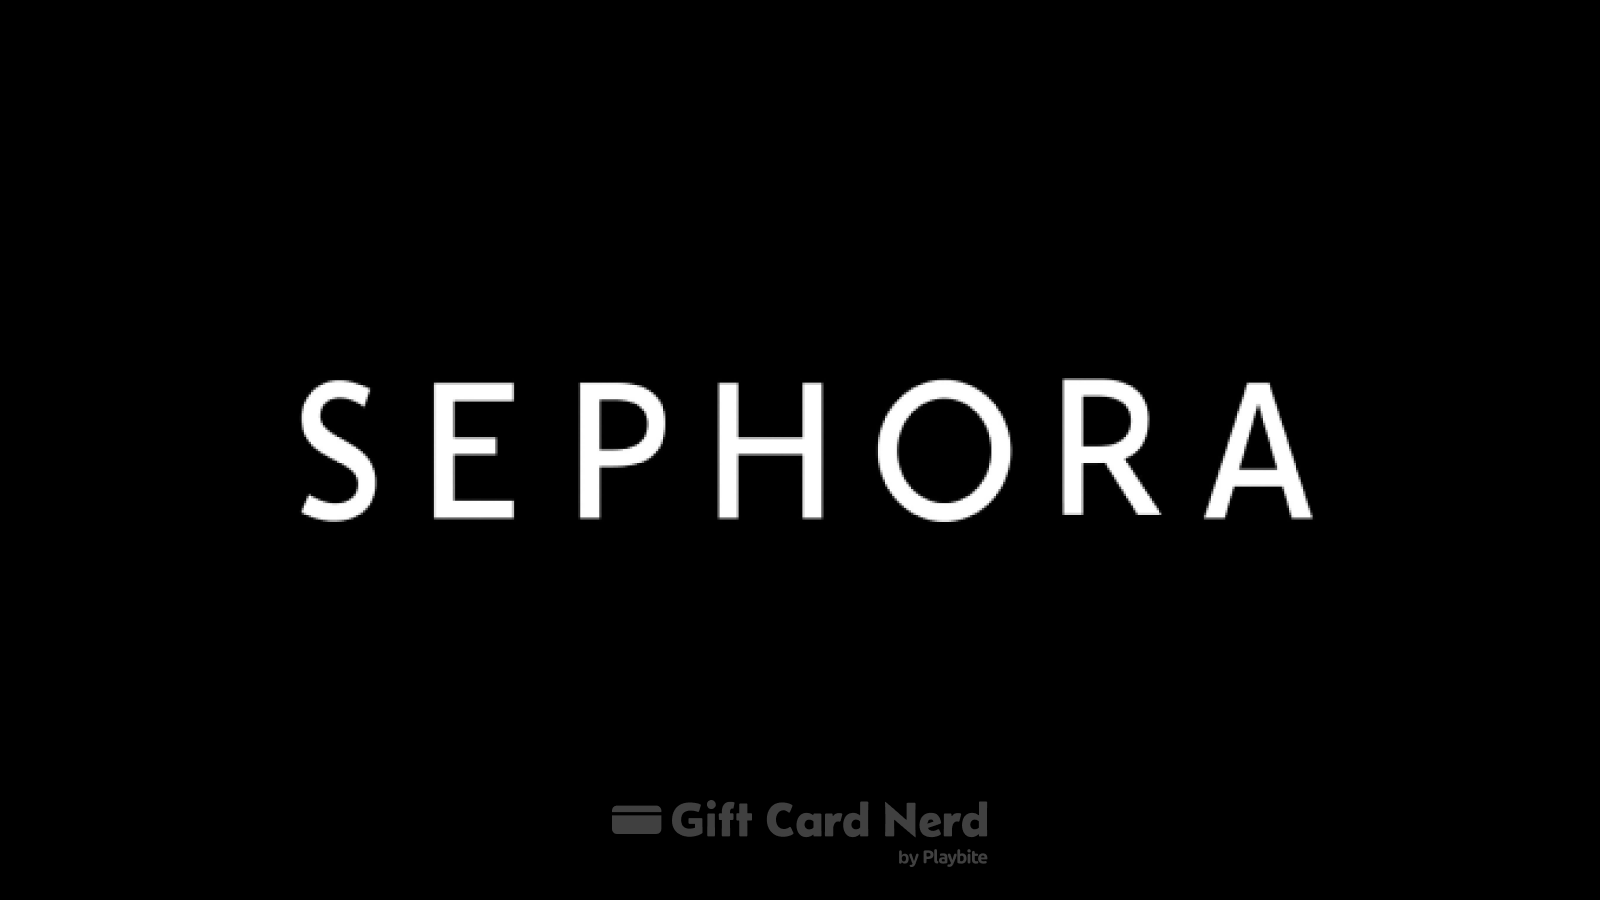 Can I Use a Sephora Gift Card on Paypal?